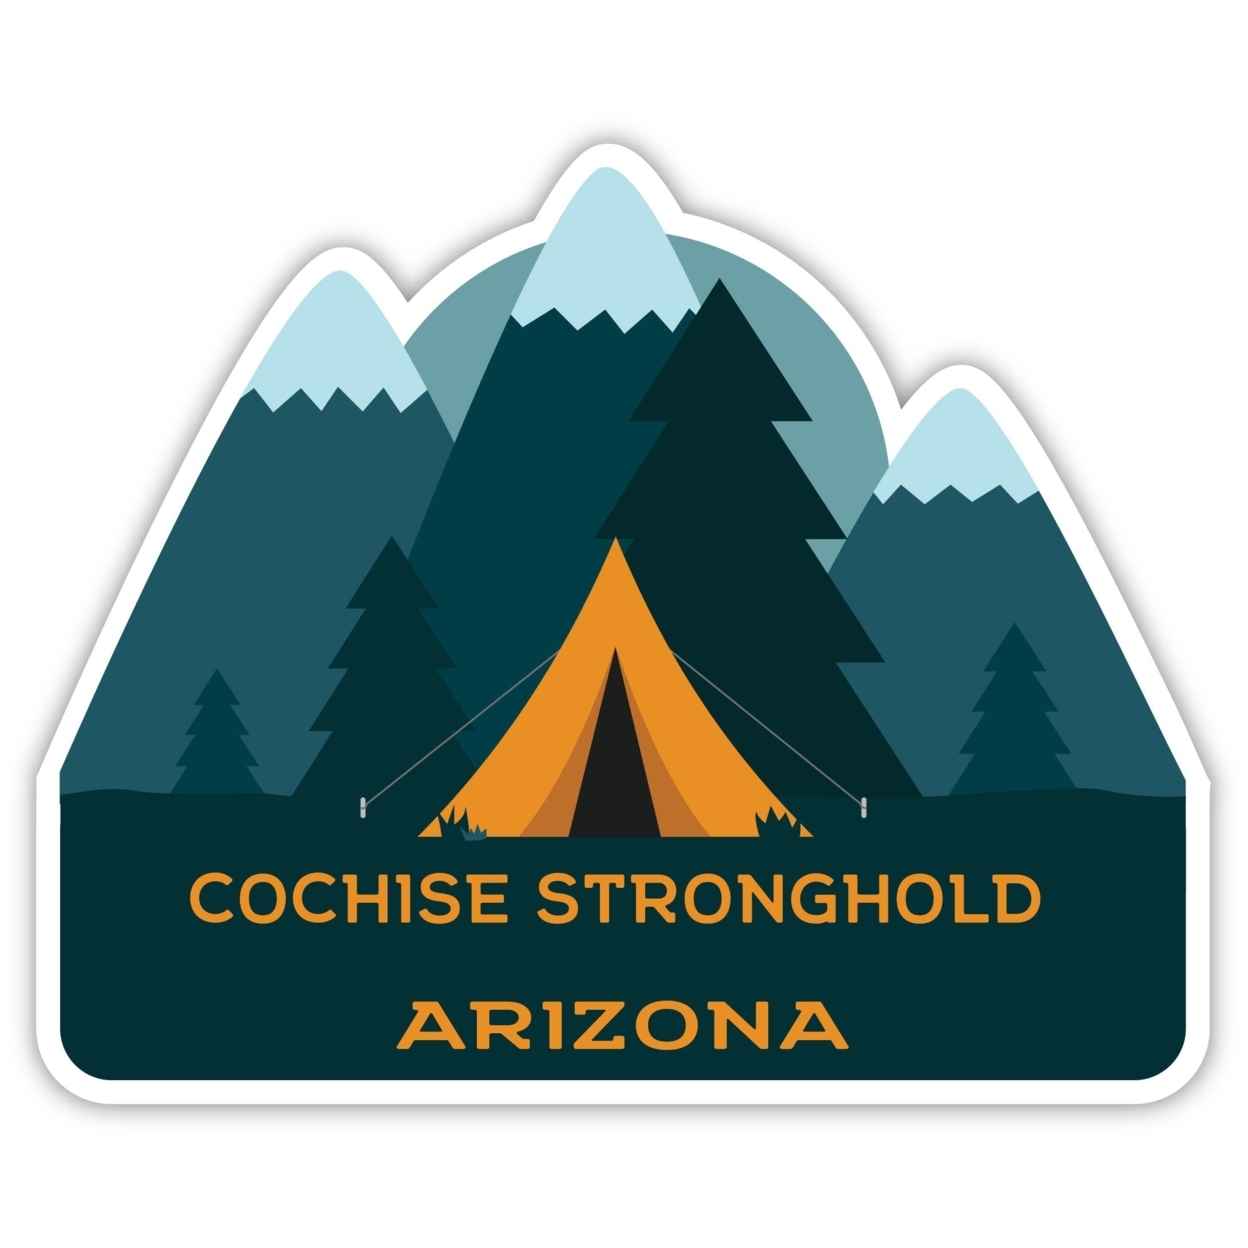 Cochise Stronghold Arizona Souvenir Decorative Stickers (Choose Theme And Size) - 4-Pack, 10-Inch, Tent